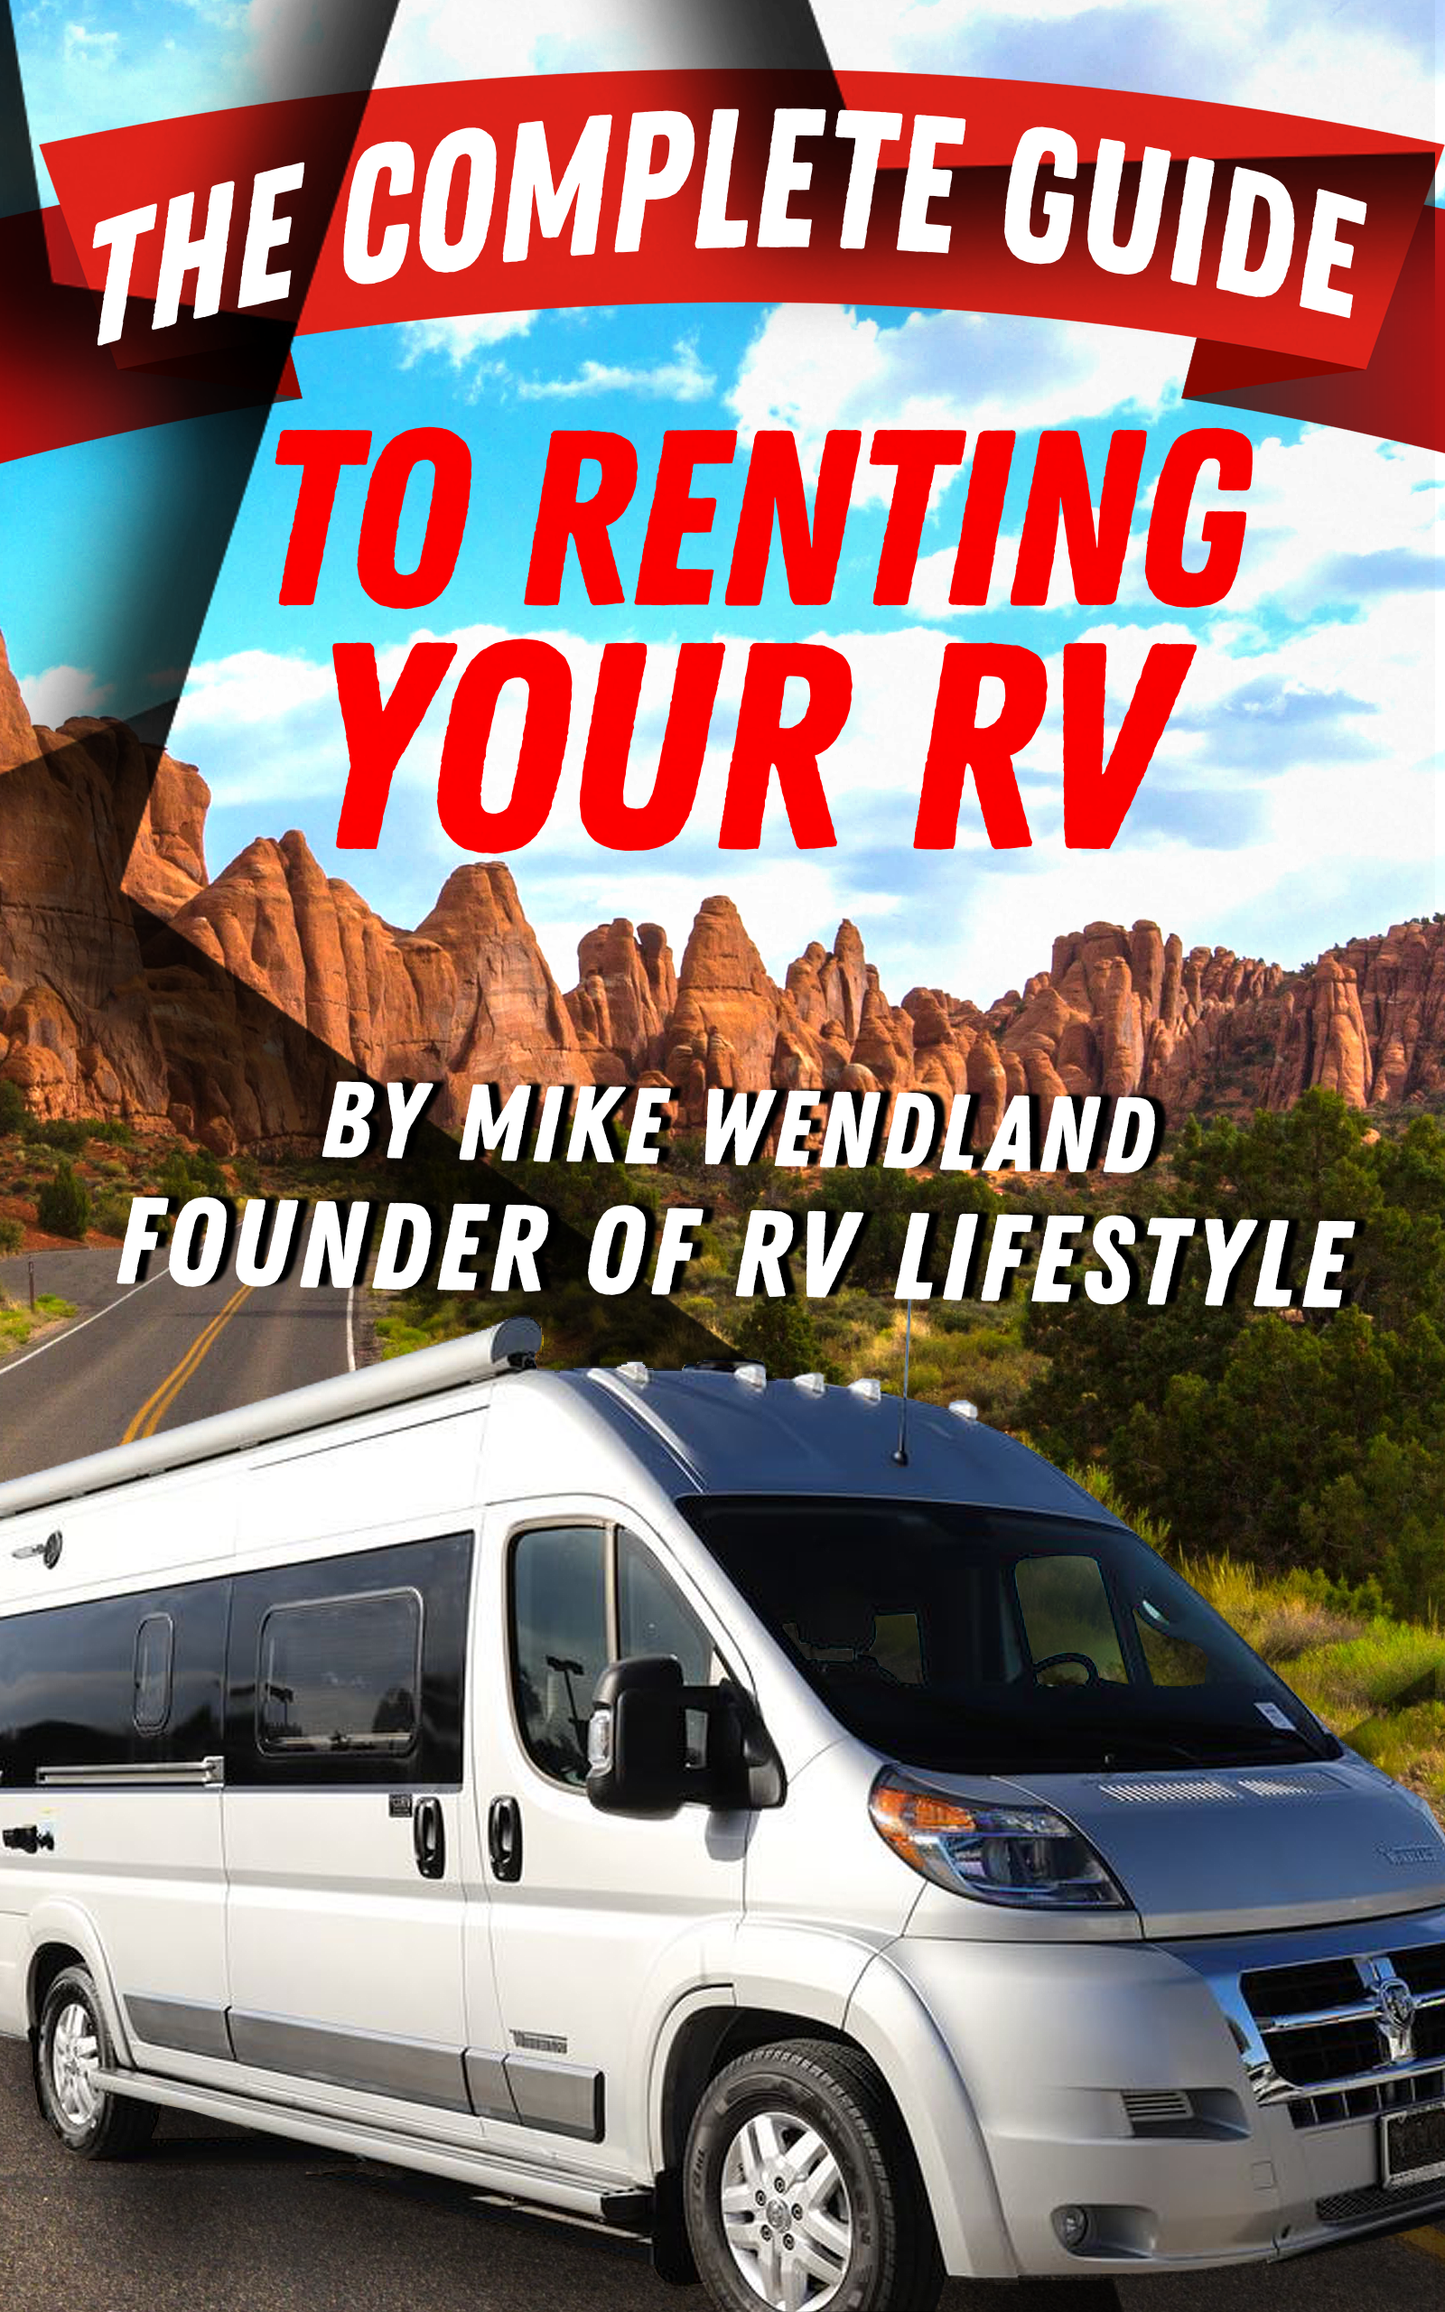 {EBOOK} The Complete Guide to Renting Your RV